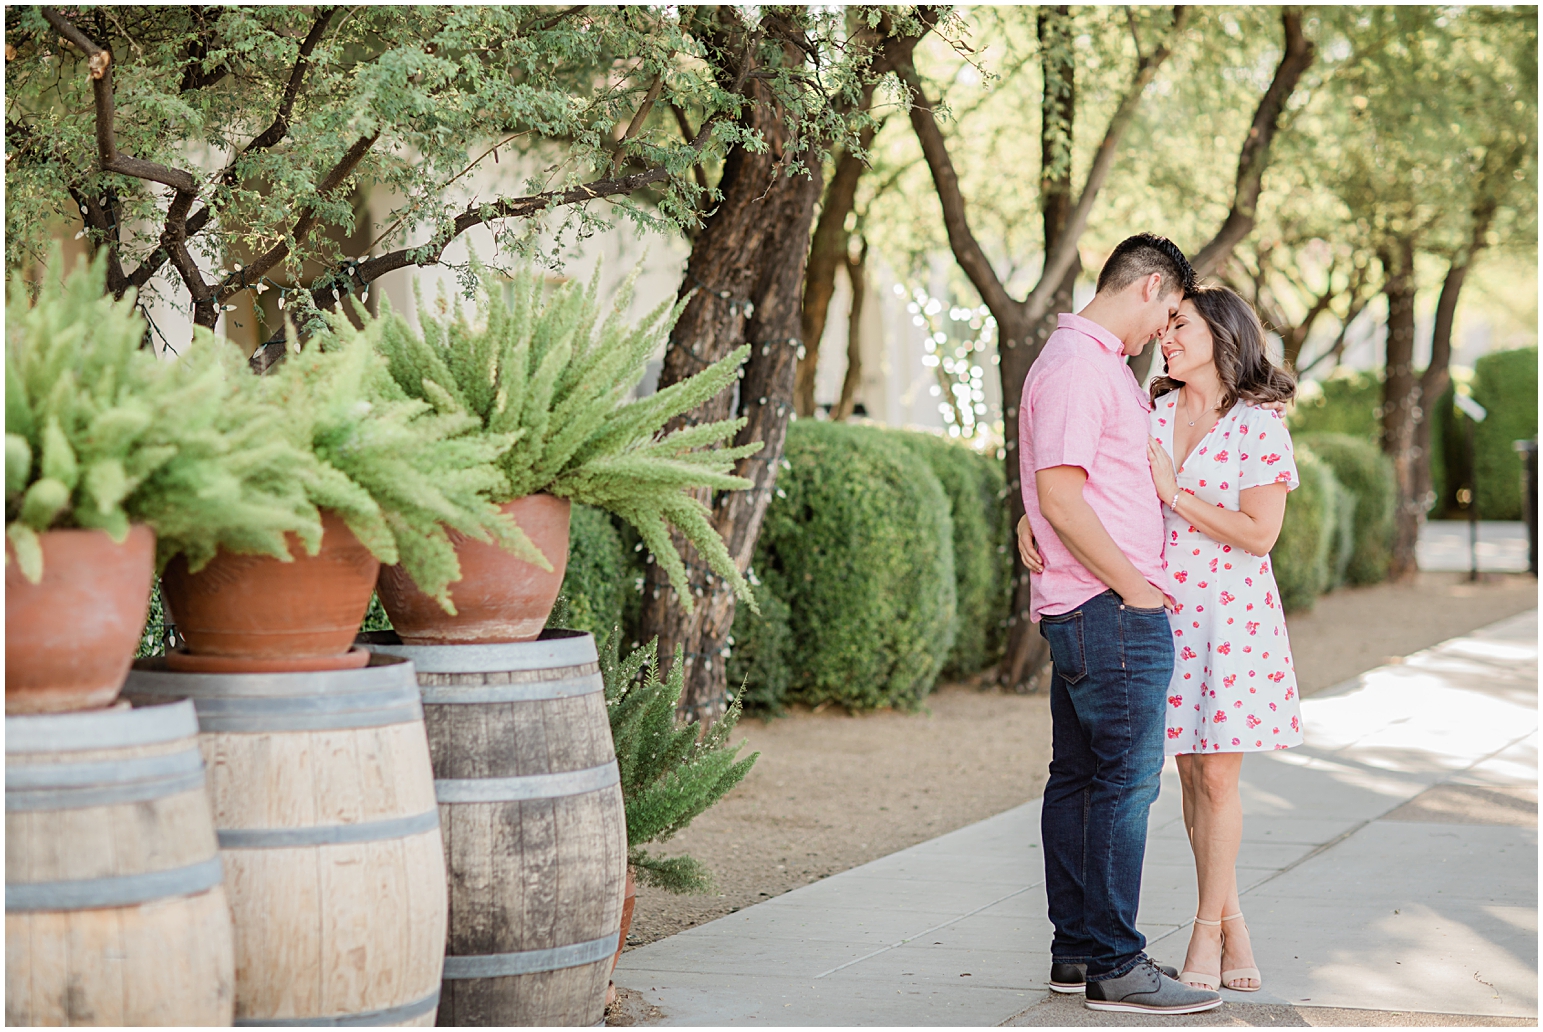 Downtown Tucson Engagement Session with Amber Lea Photography.